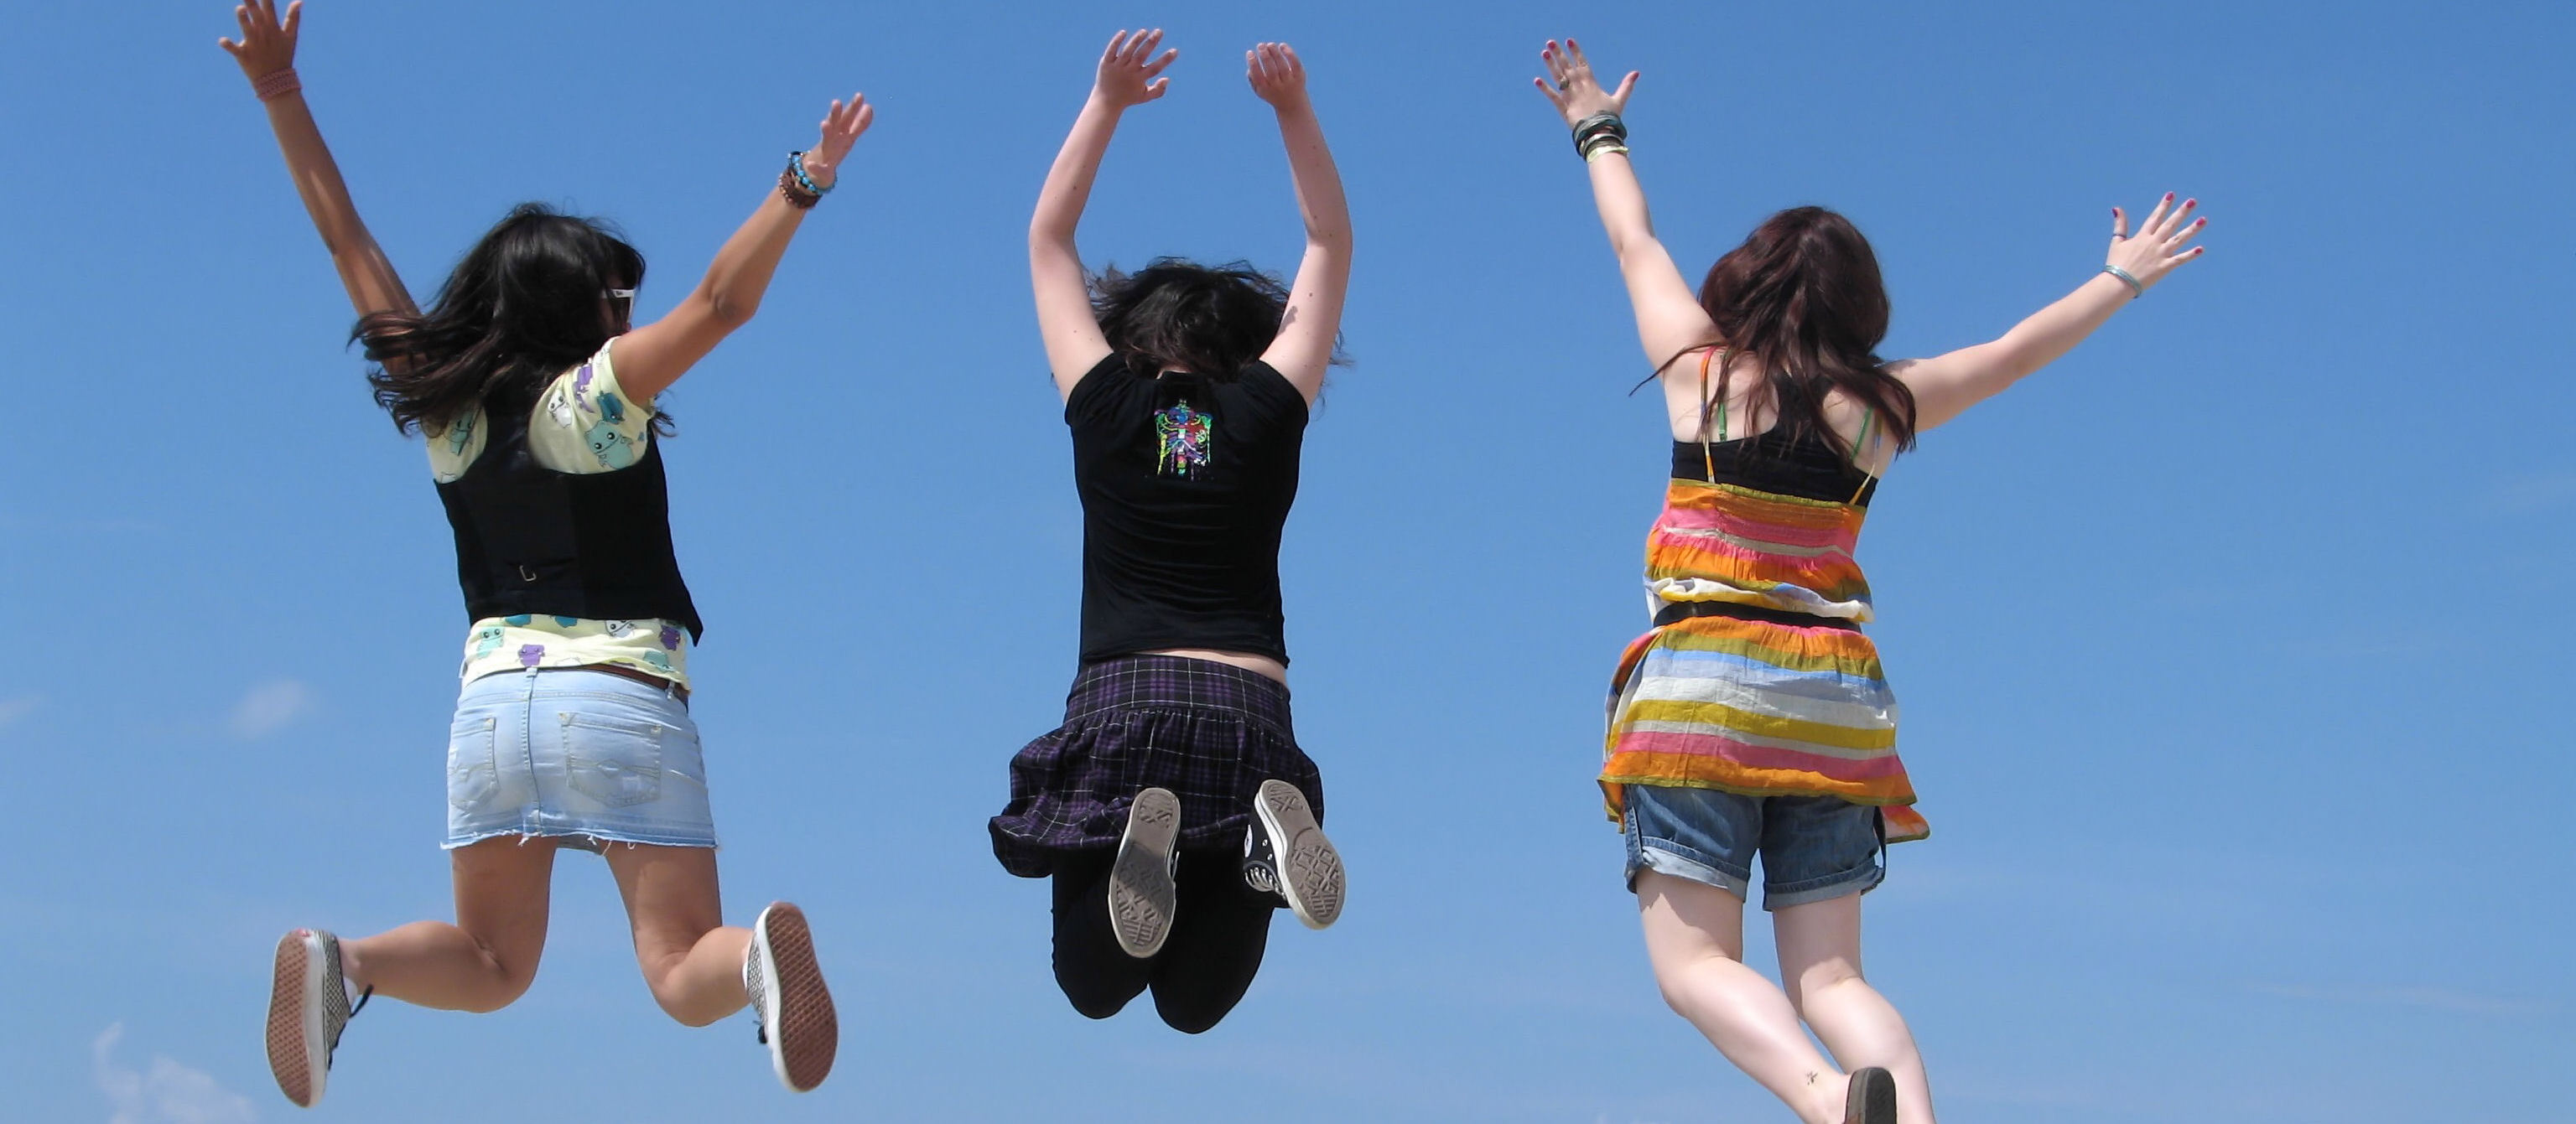 three young girls jumping in the air